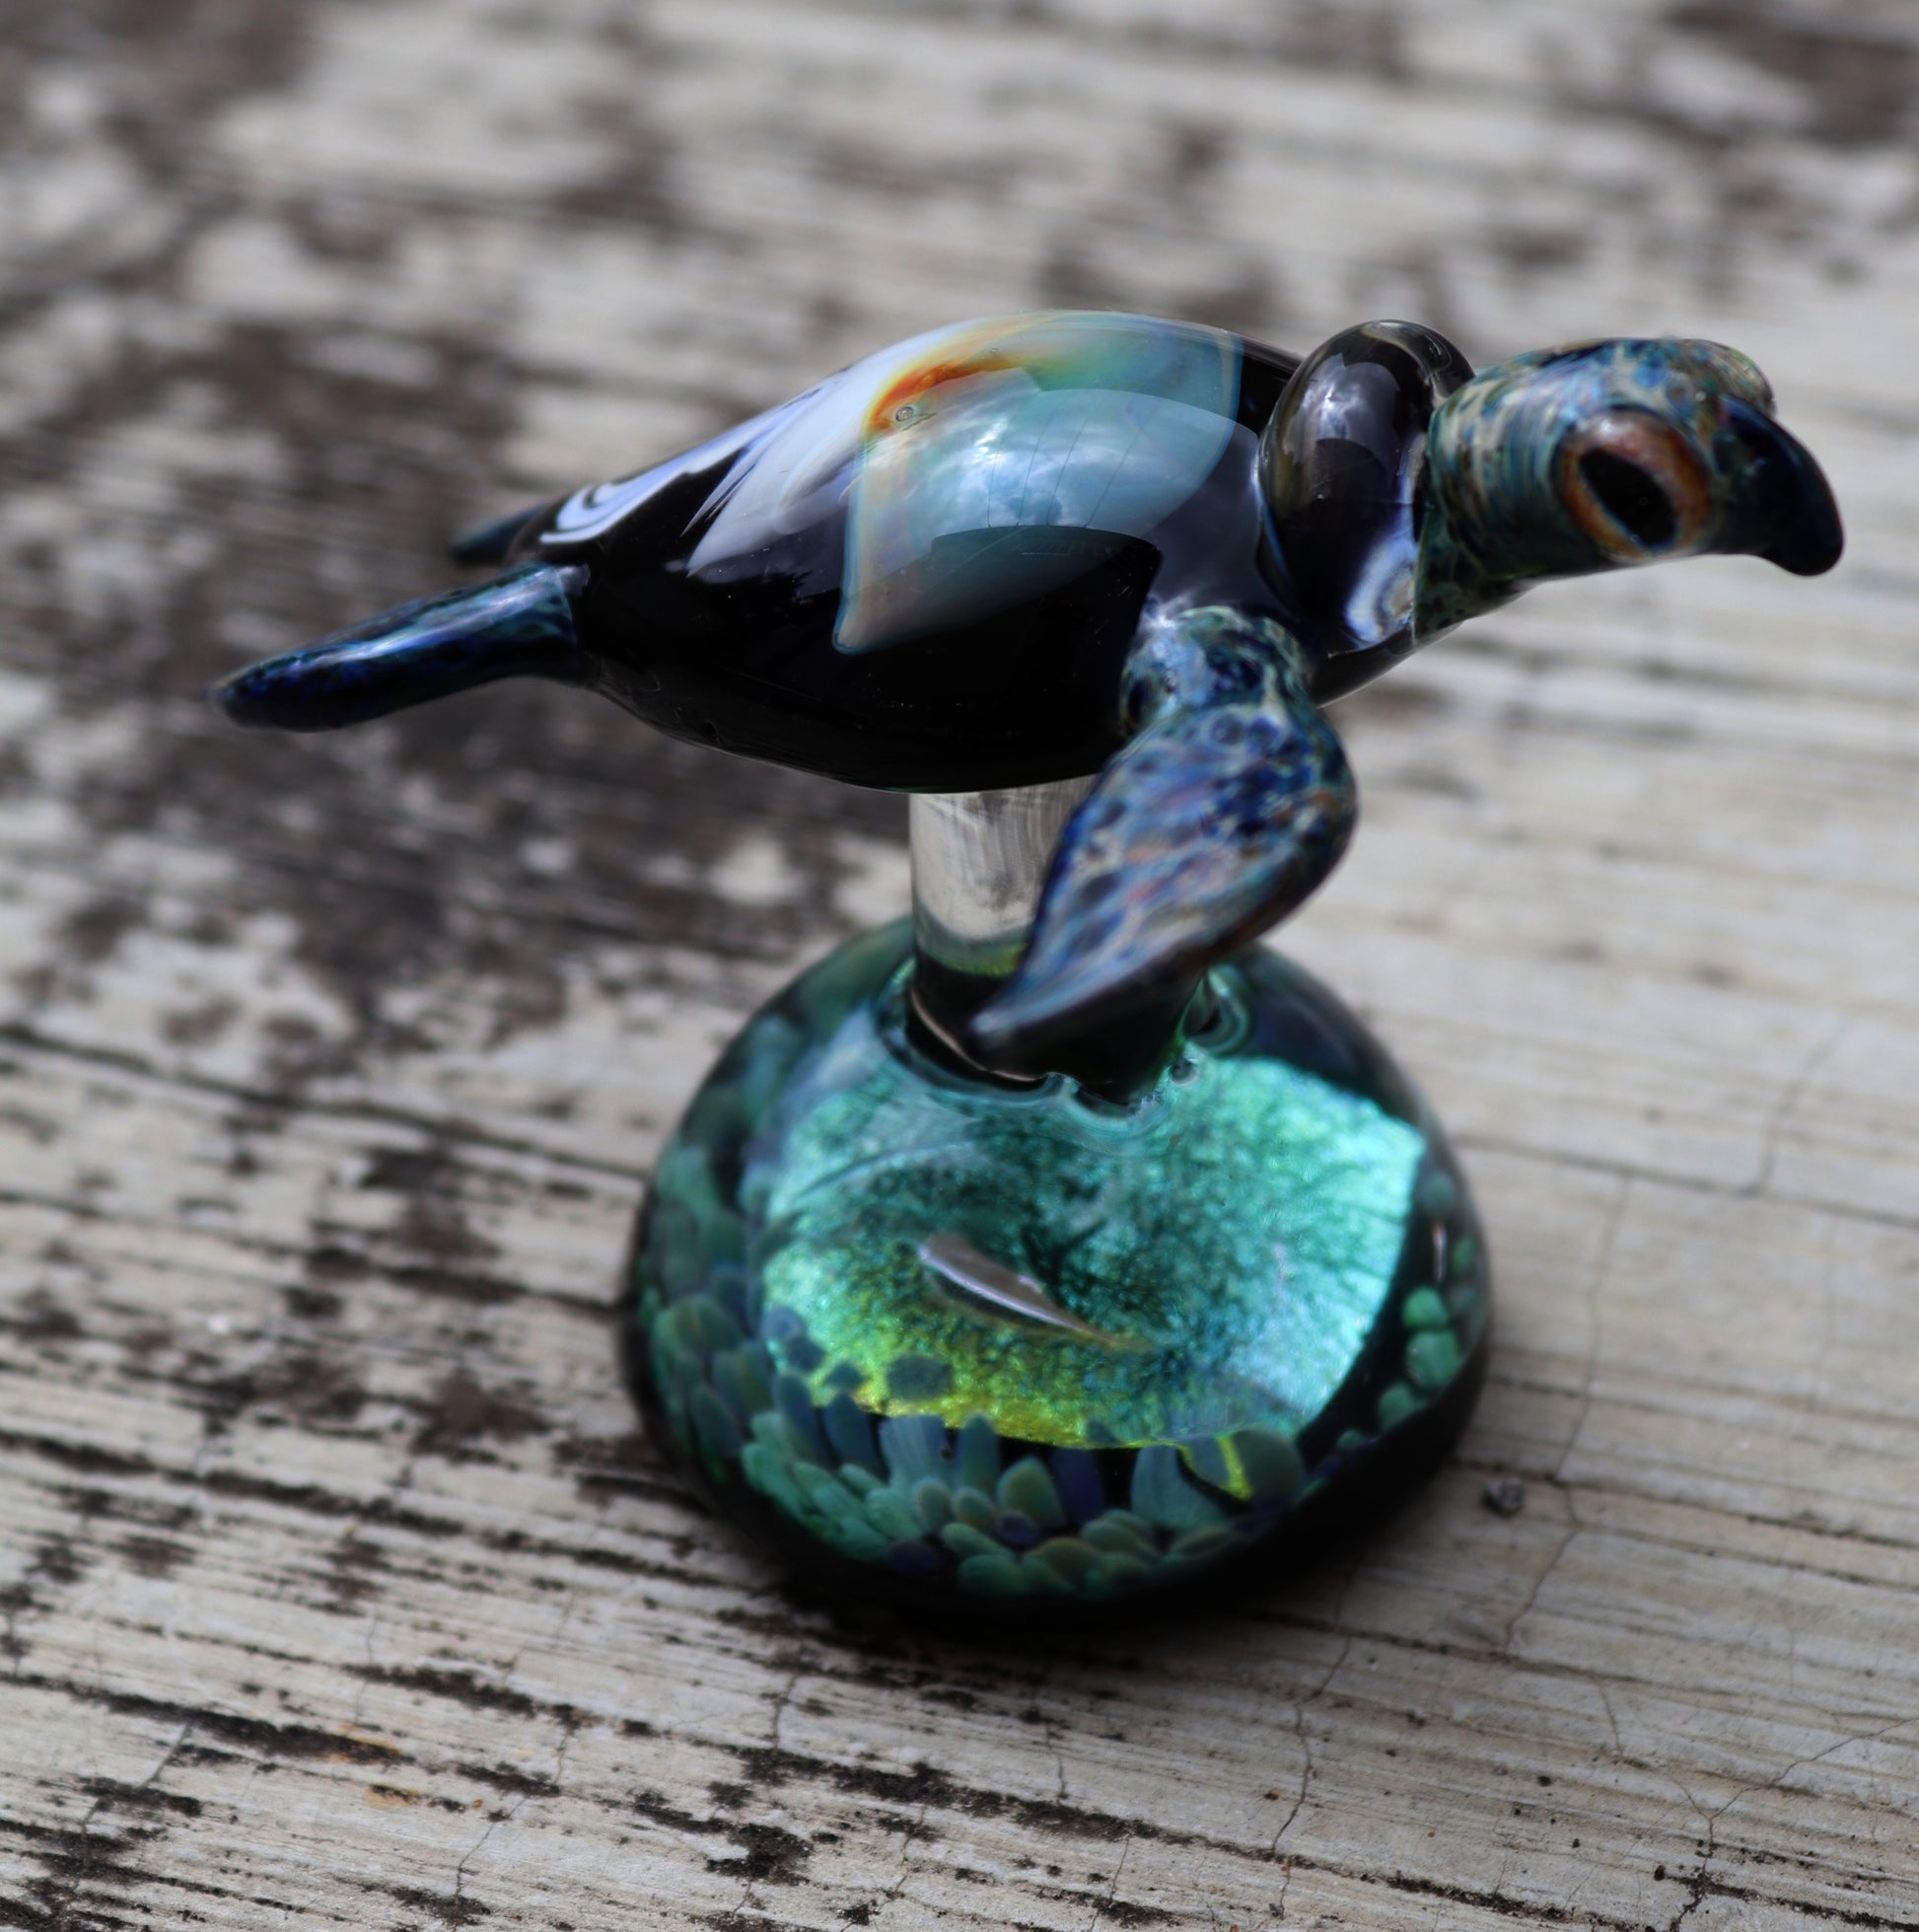 Unique Sea Turtle Sculpture with Opal Colored Jellyfish Inside. - GLASSnFIRE